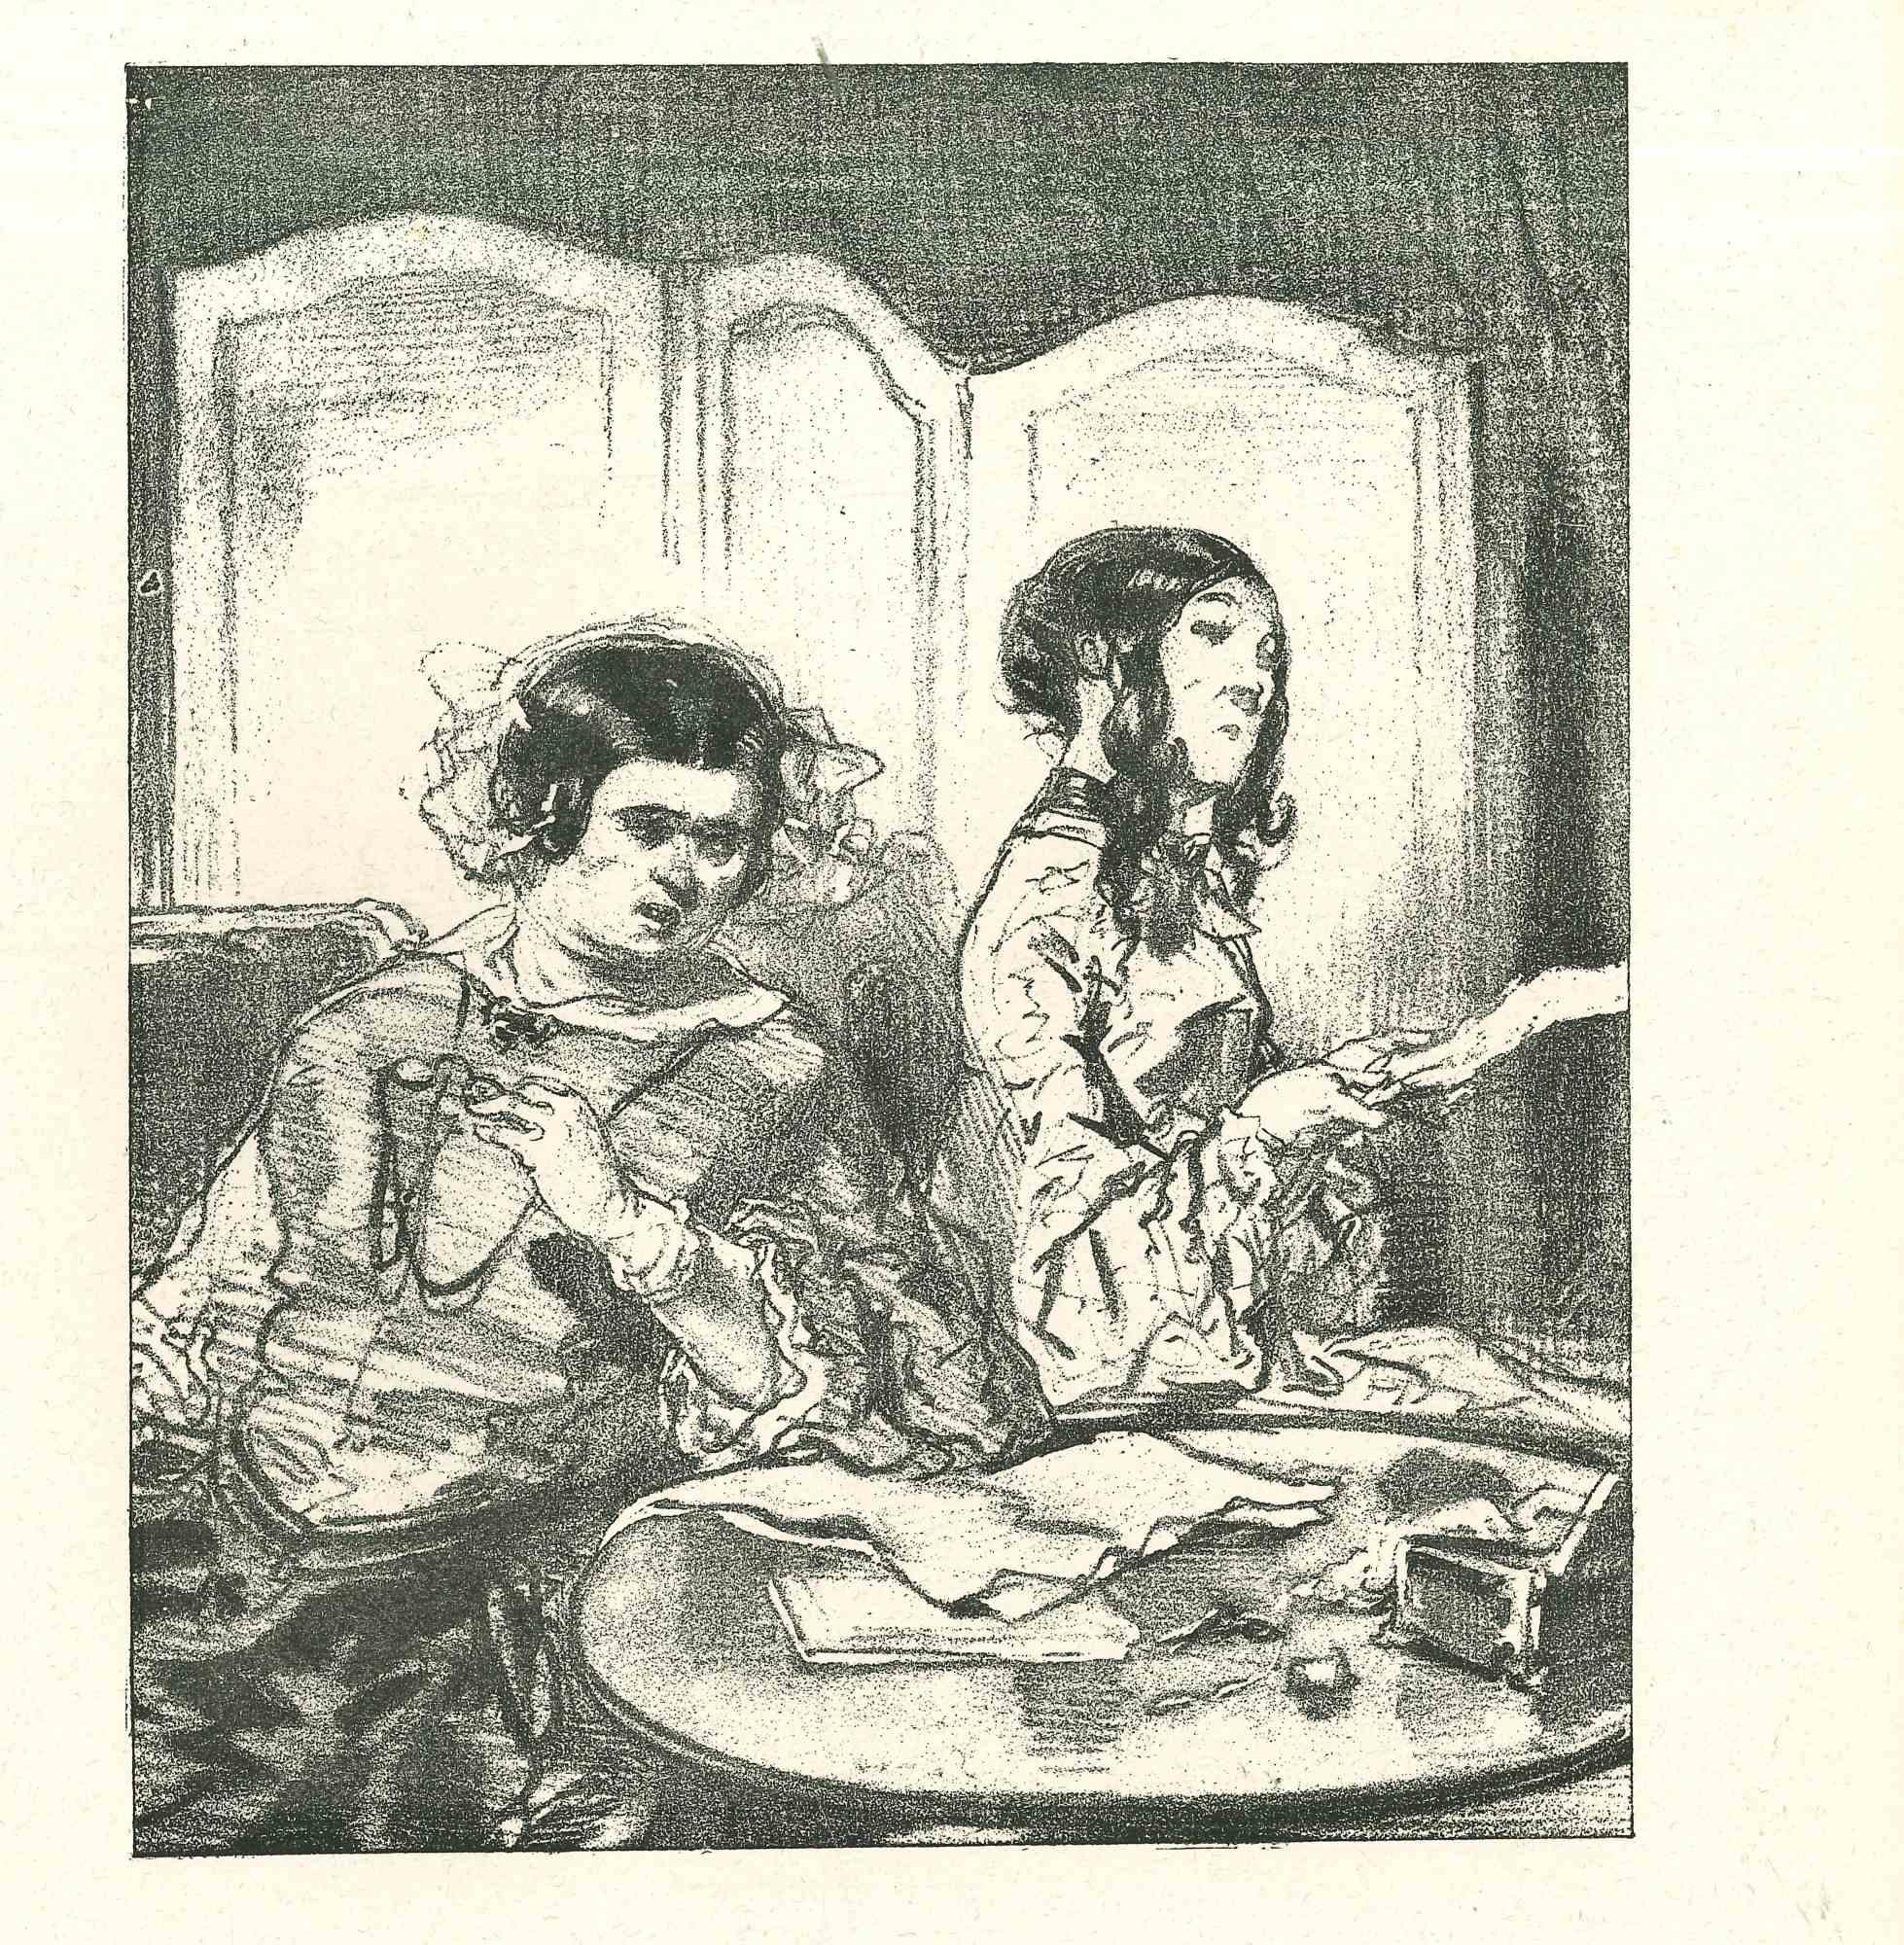 Women over the table is an original lithograph artwork on ivory-colored paper, realized by the French draftsman Paul Gavarni (after) (alias Guillaume Sulpice Chevalier Gavarni, 1804-1866) in Paris, 1881, in the collection of Illustrations for "La